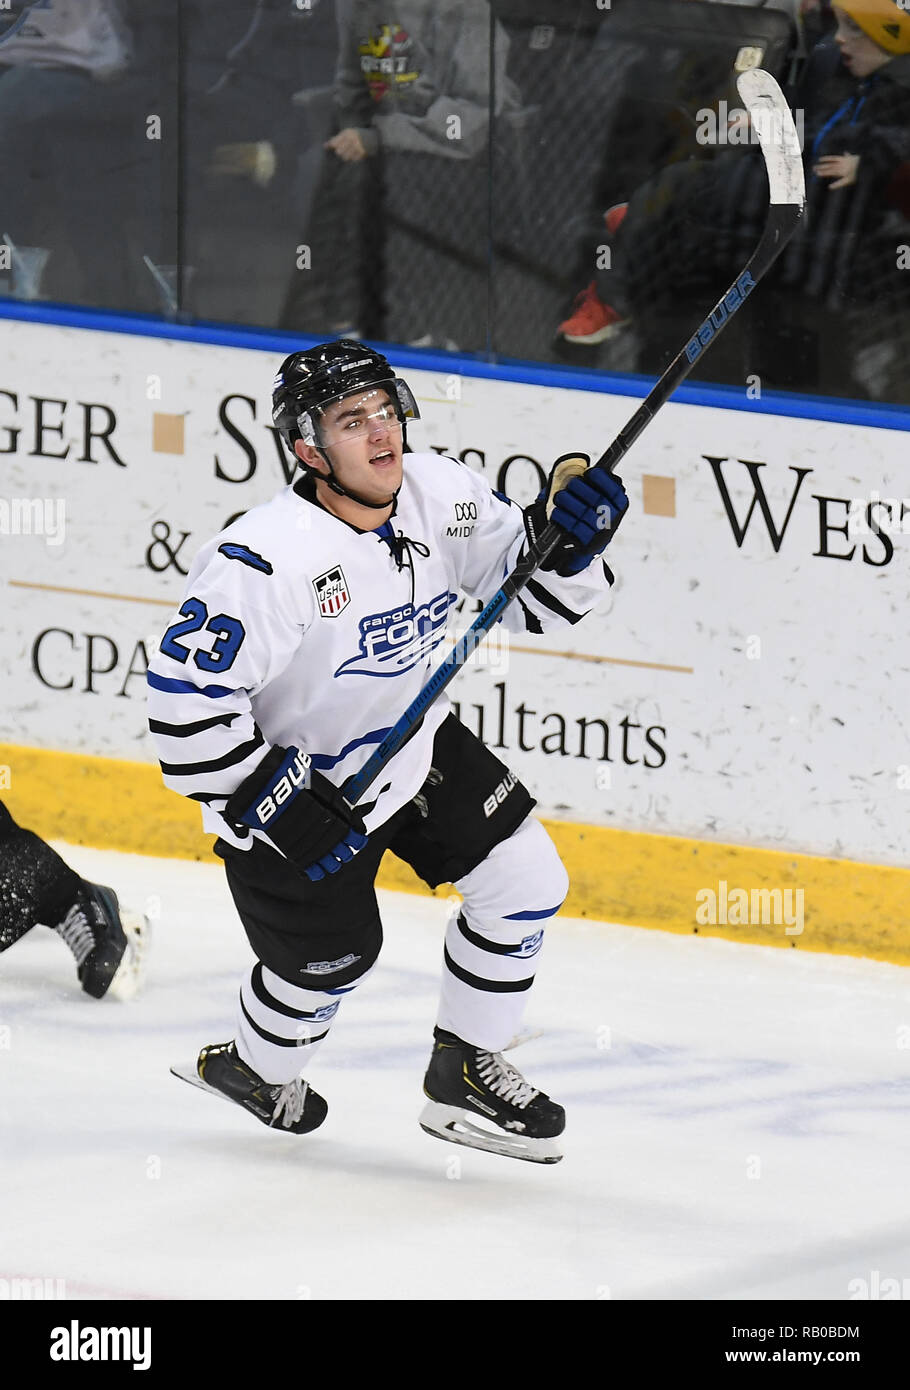 Fargo, ND, USA. 5th Jan, 2019. Fargo Force foward Mason Salquist celebrates scoring a goal during a USHL game between the Green Bay Gamblers and the Fargo Force at Scheels Arena in Fargo, ND. Fargo defeated Green Bay 4-2. Photo by Russell Hons/CSM/Alamy Live News Stock Photo